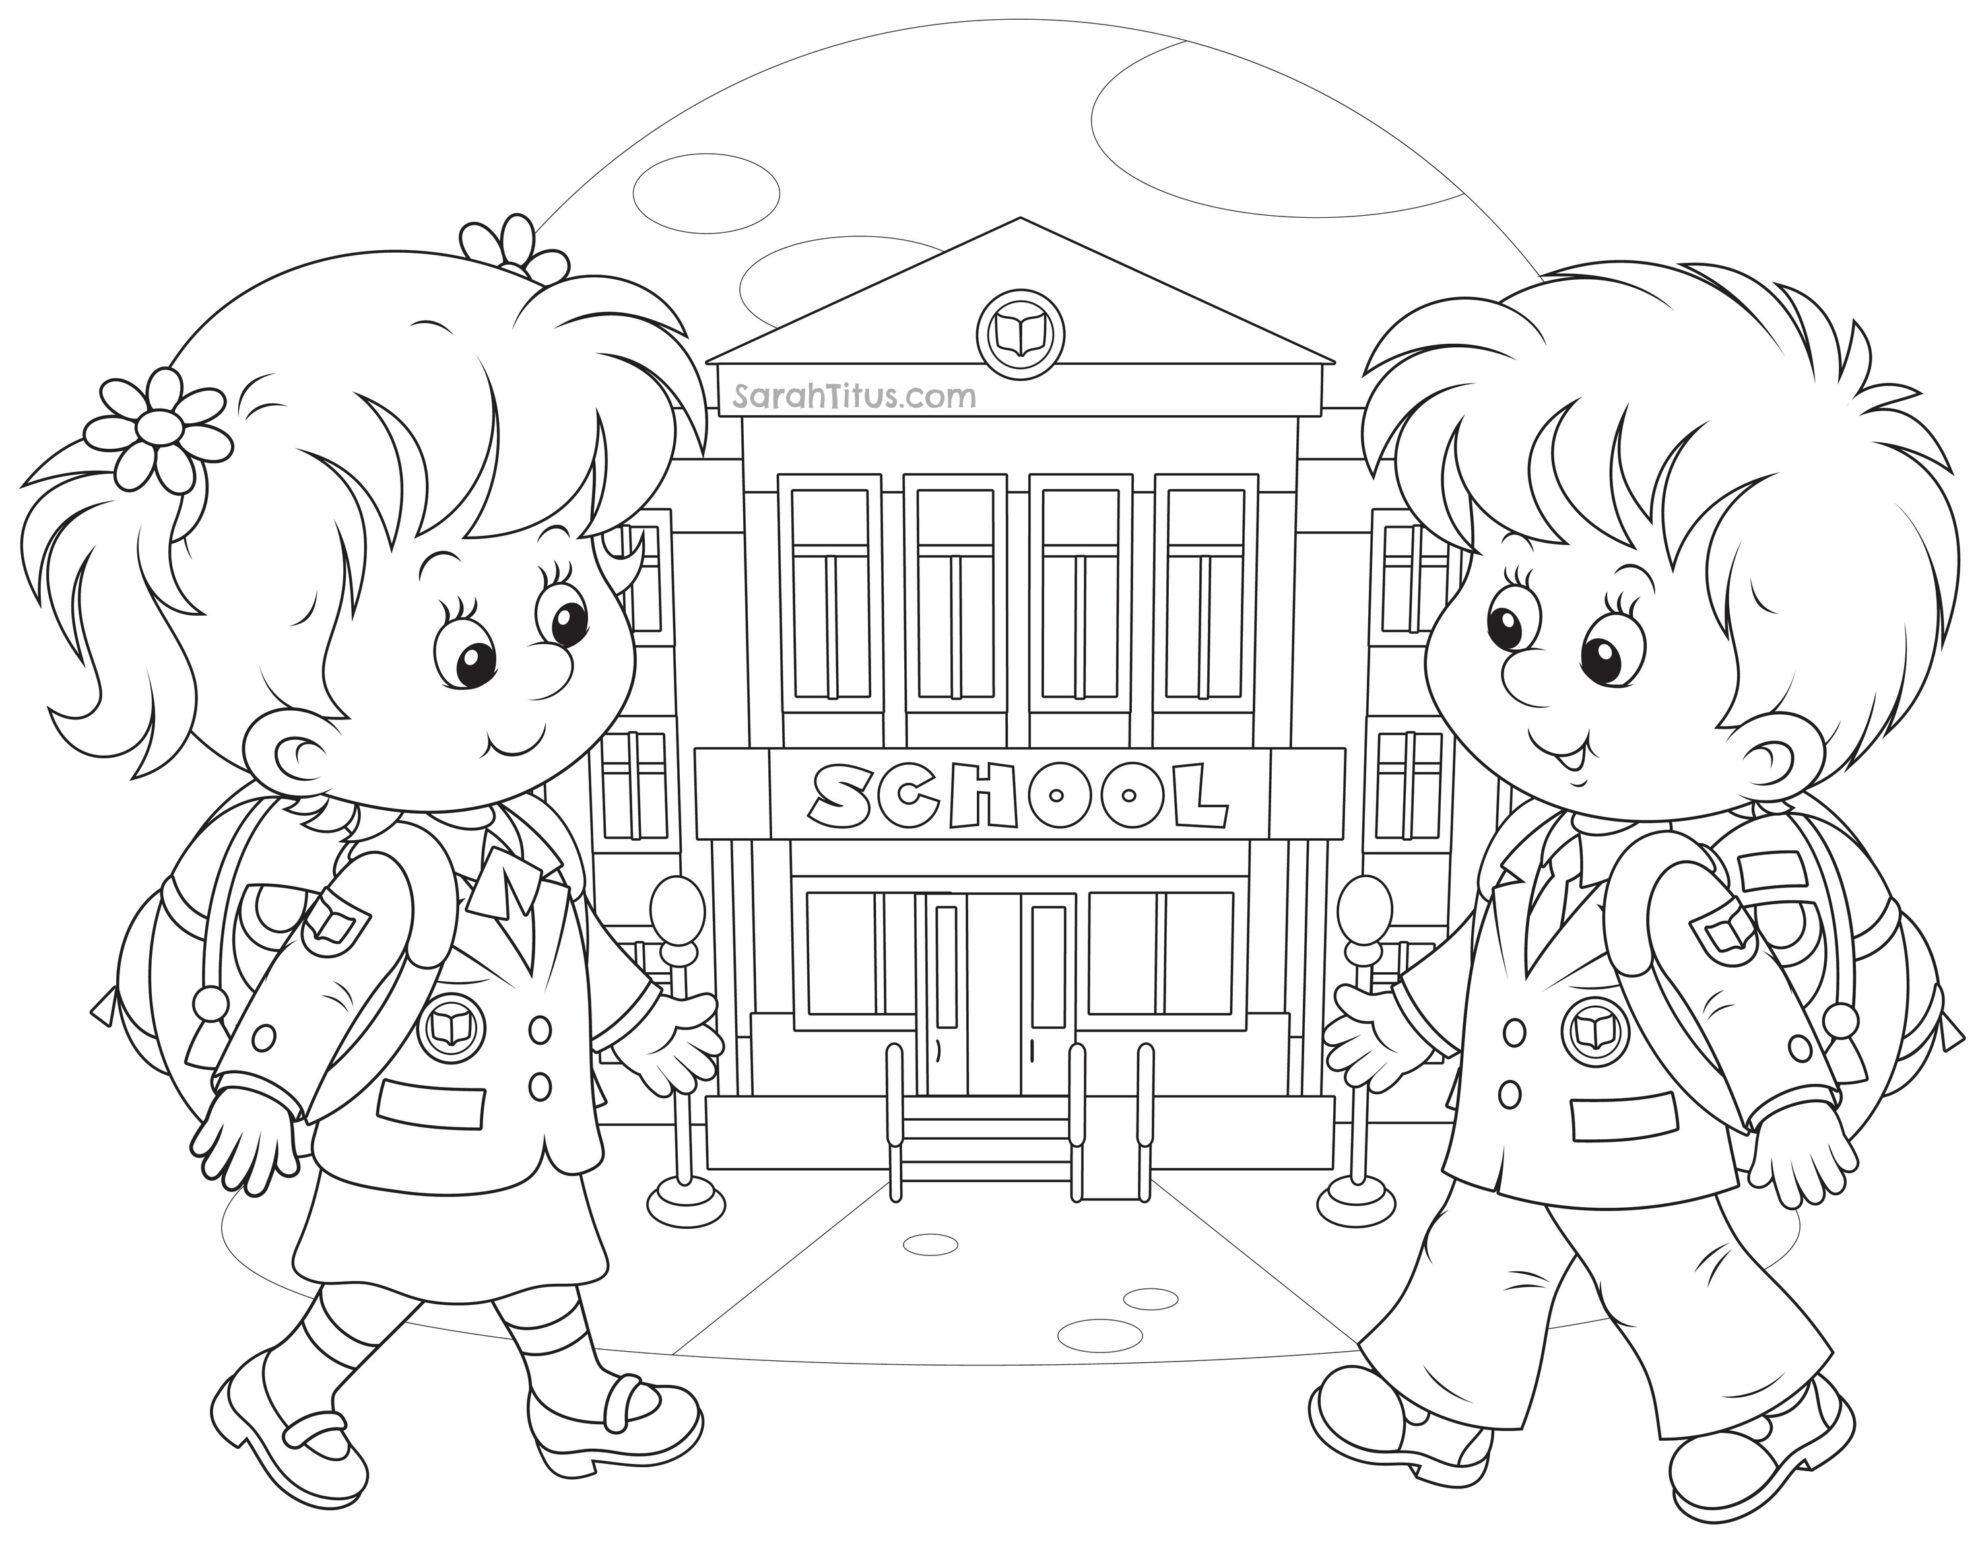 School Coloring Pages For Kids Coloring Pages